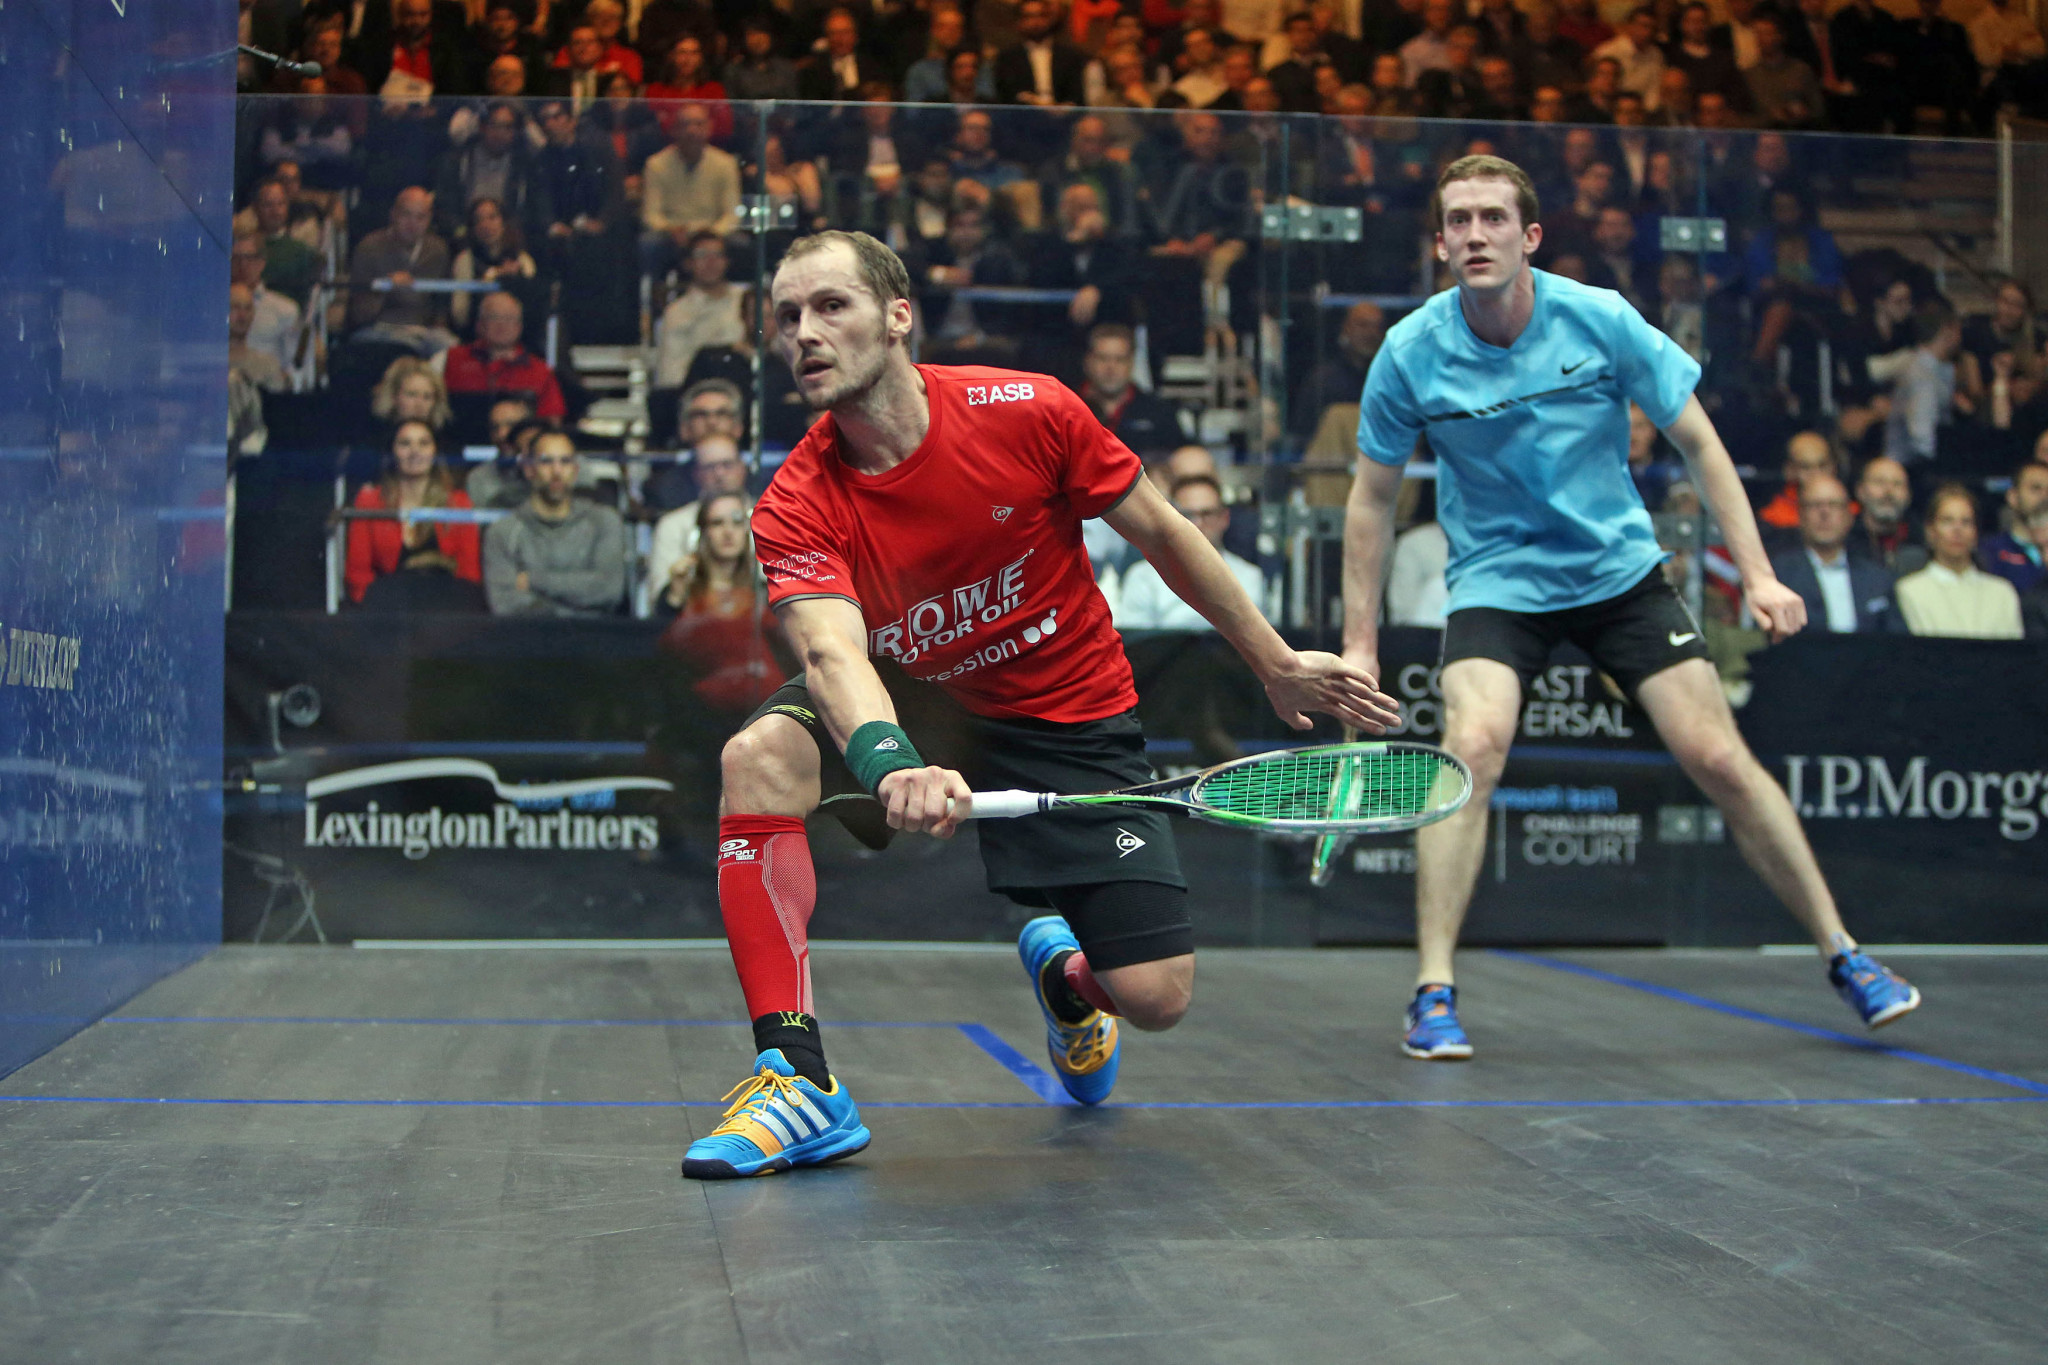 Gaultier safely through to second round at PSA Tournament of Champions in 700th match of career